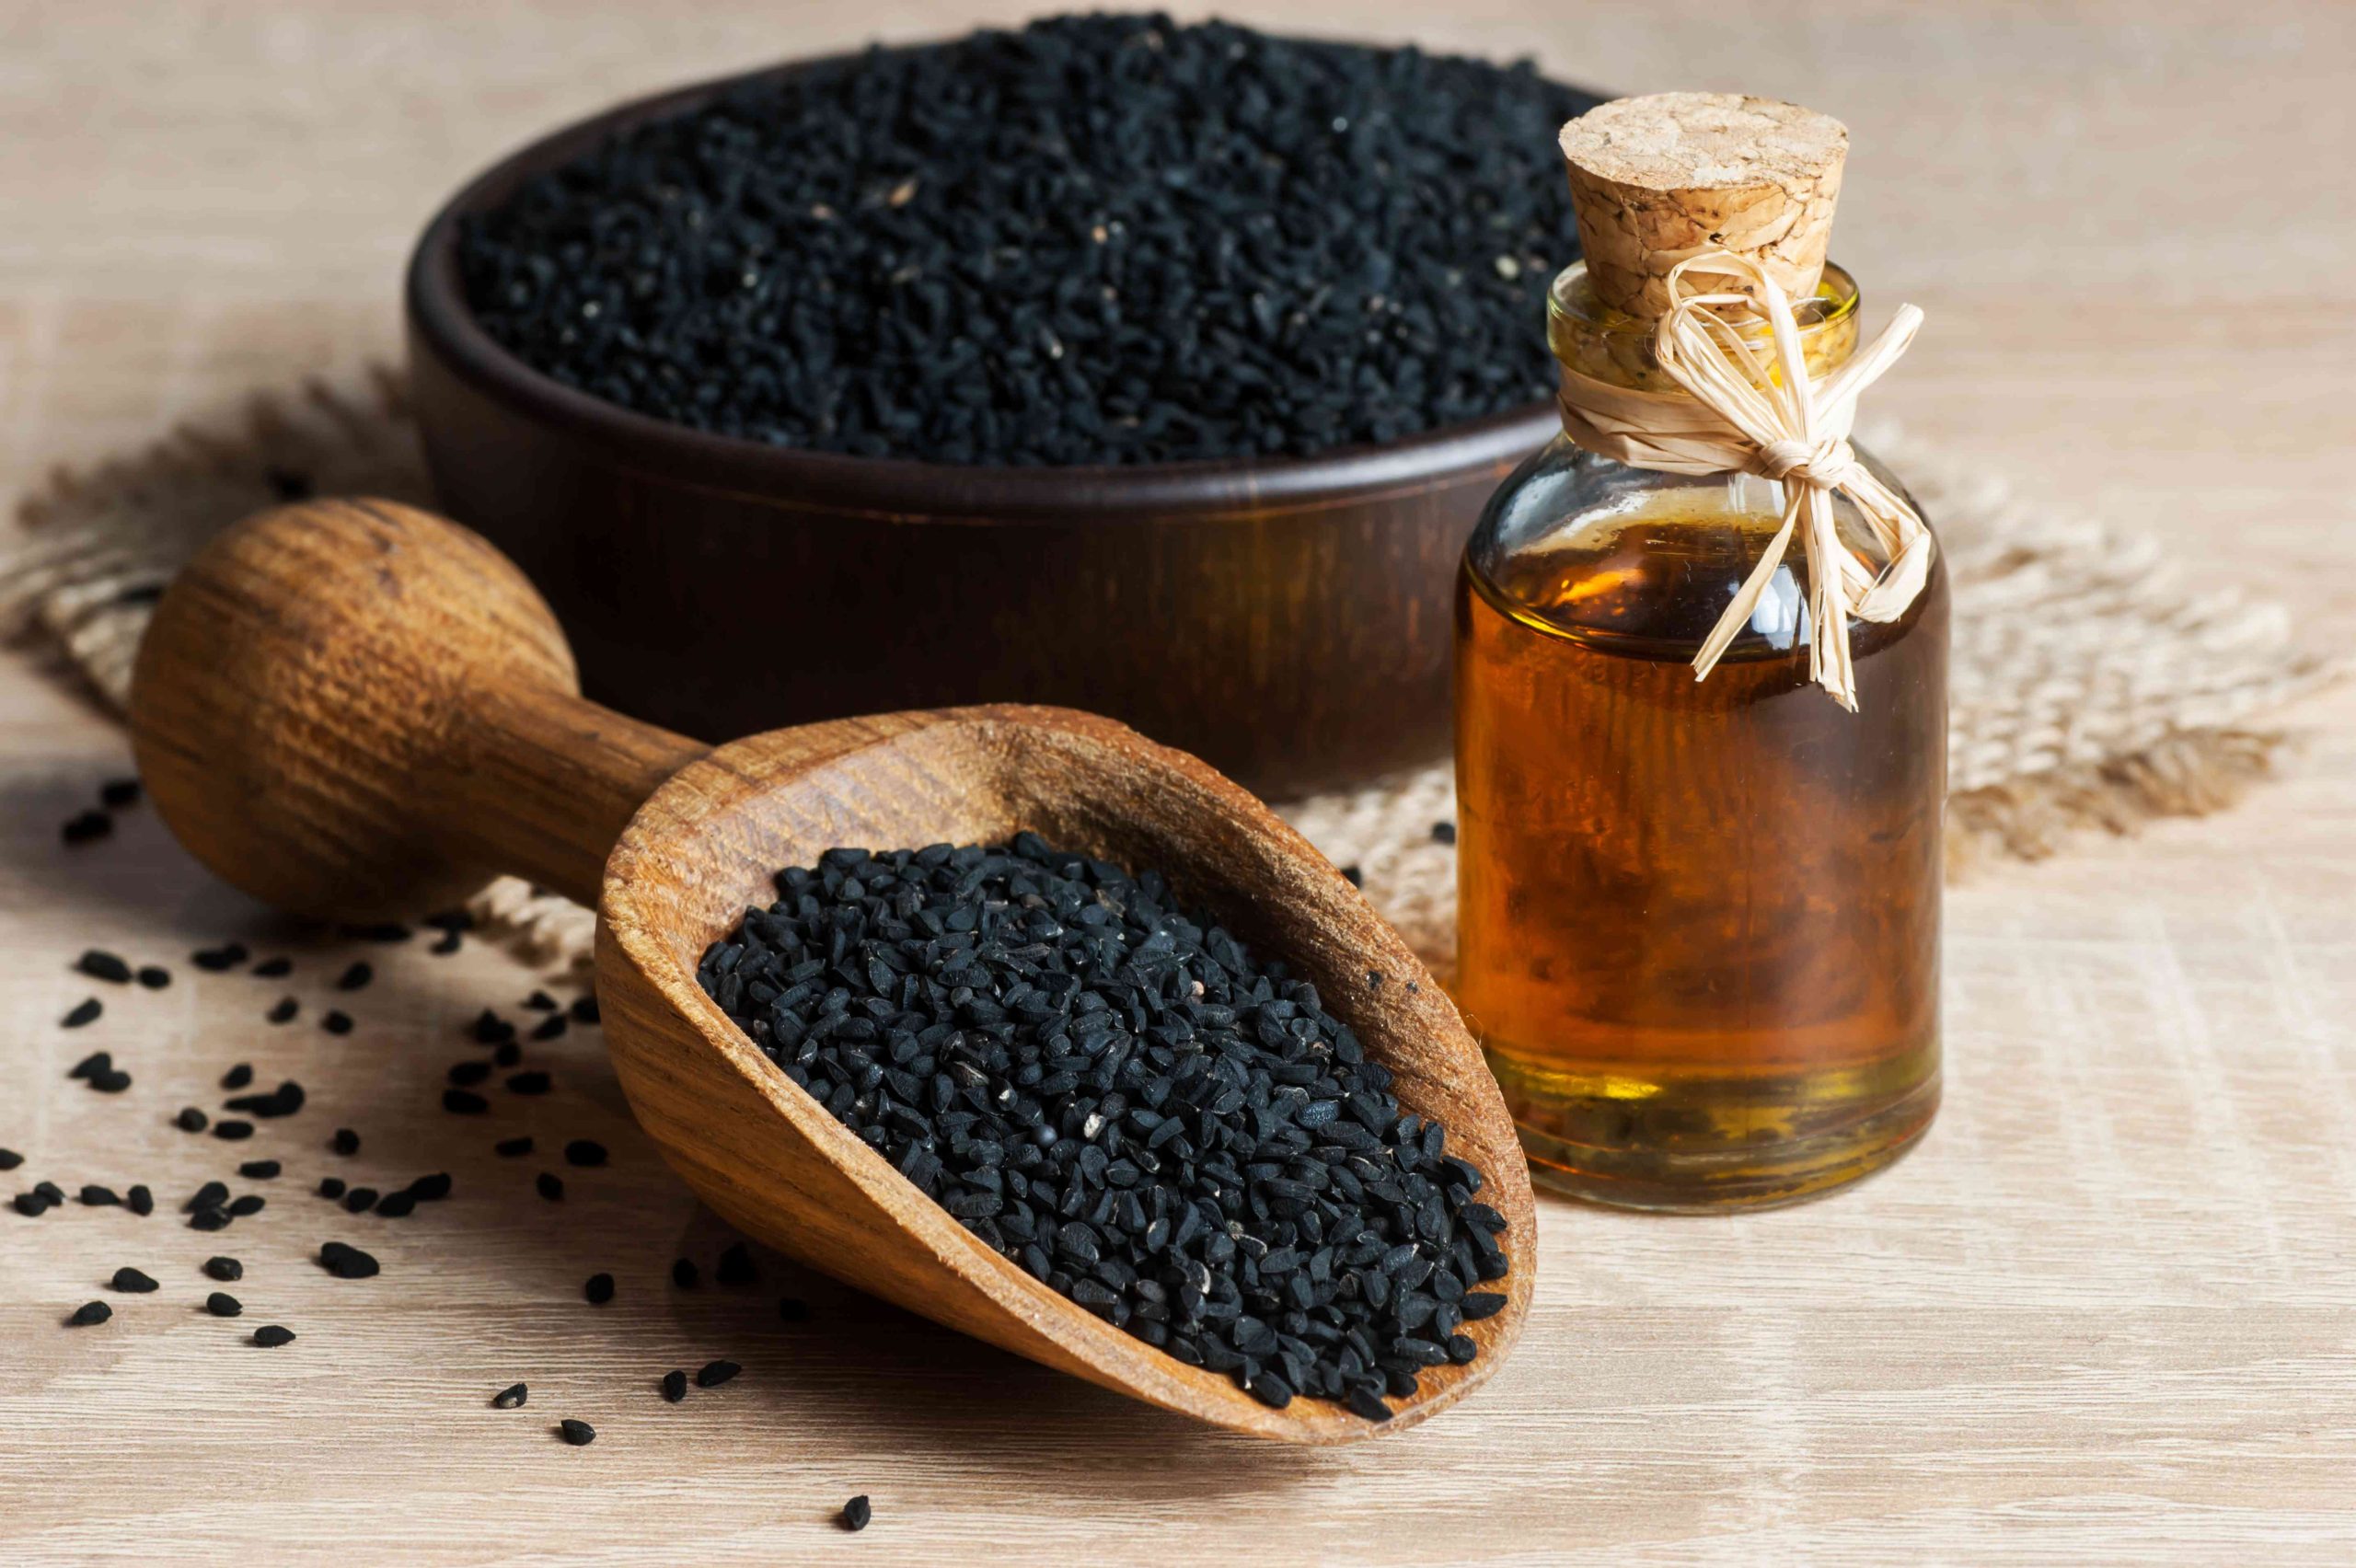 Some Benefits of Black Seed Oil For Your Health